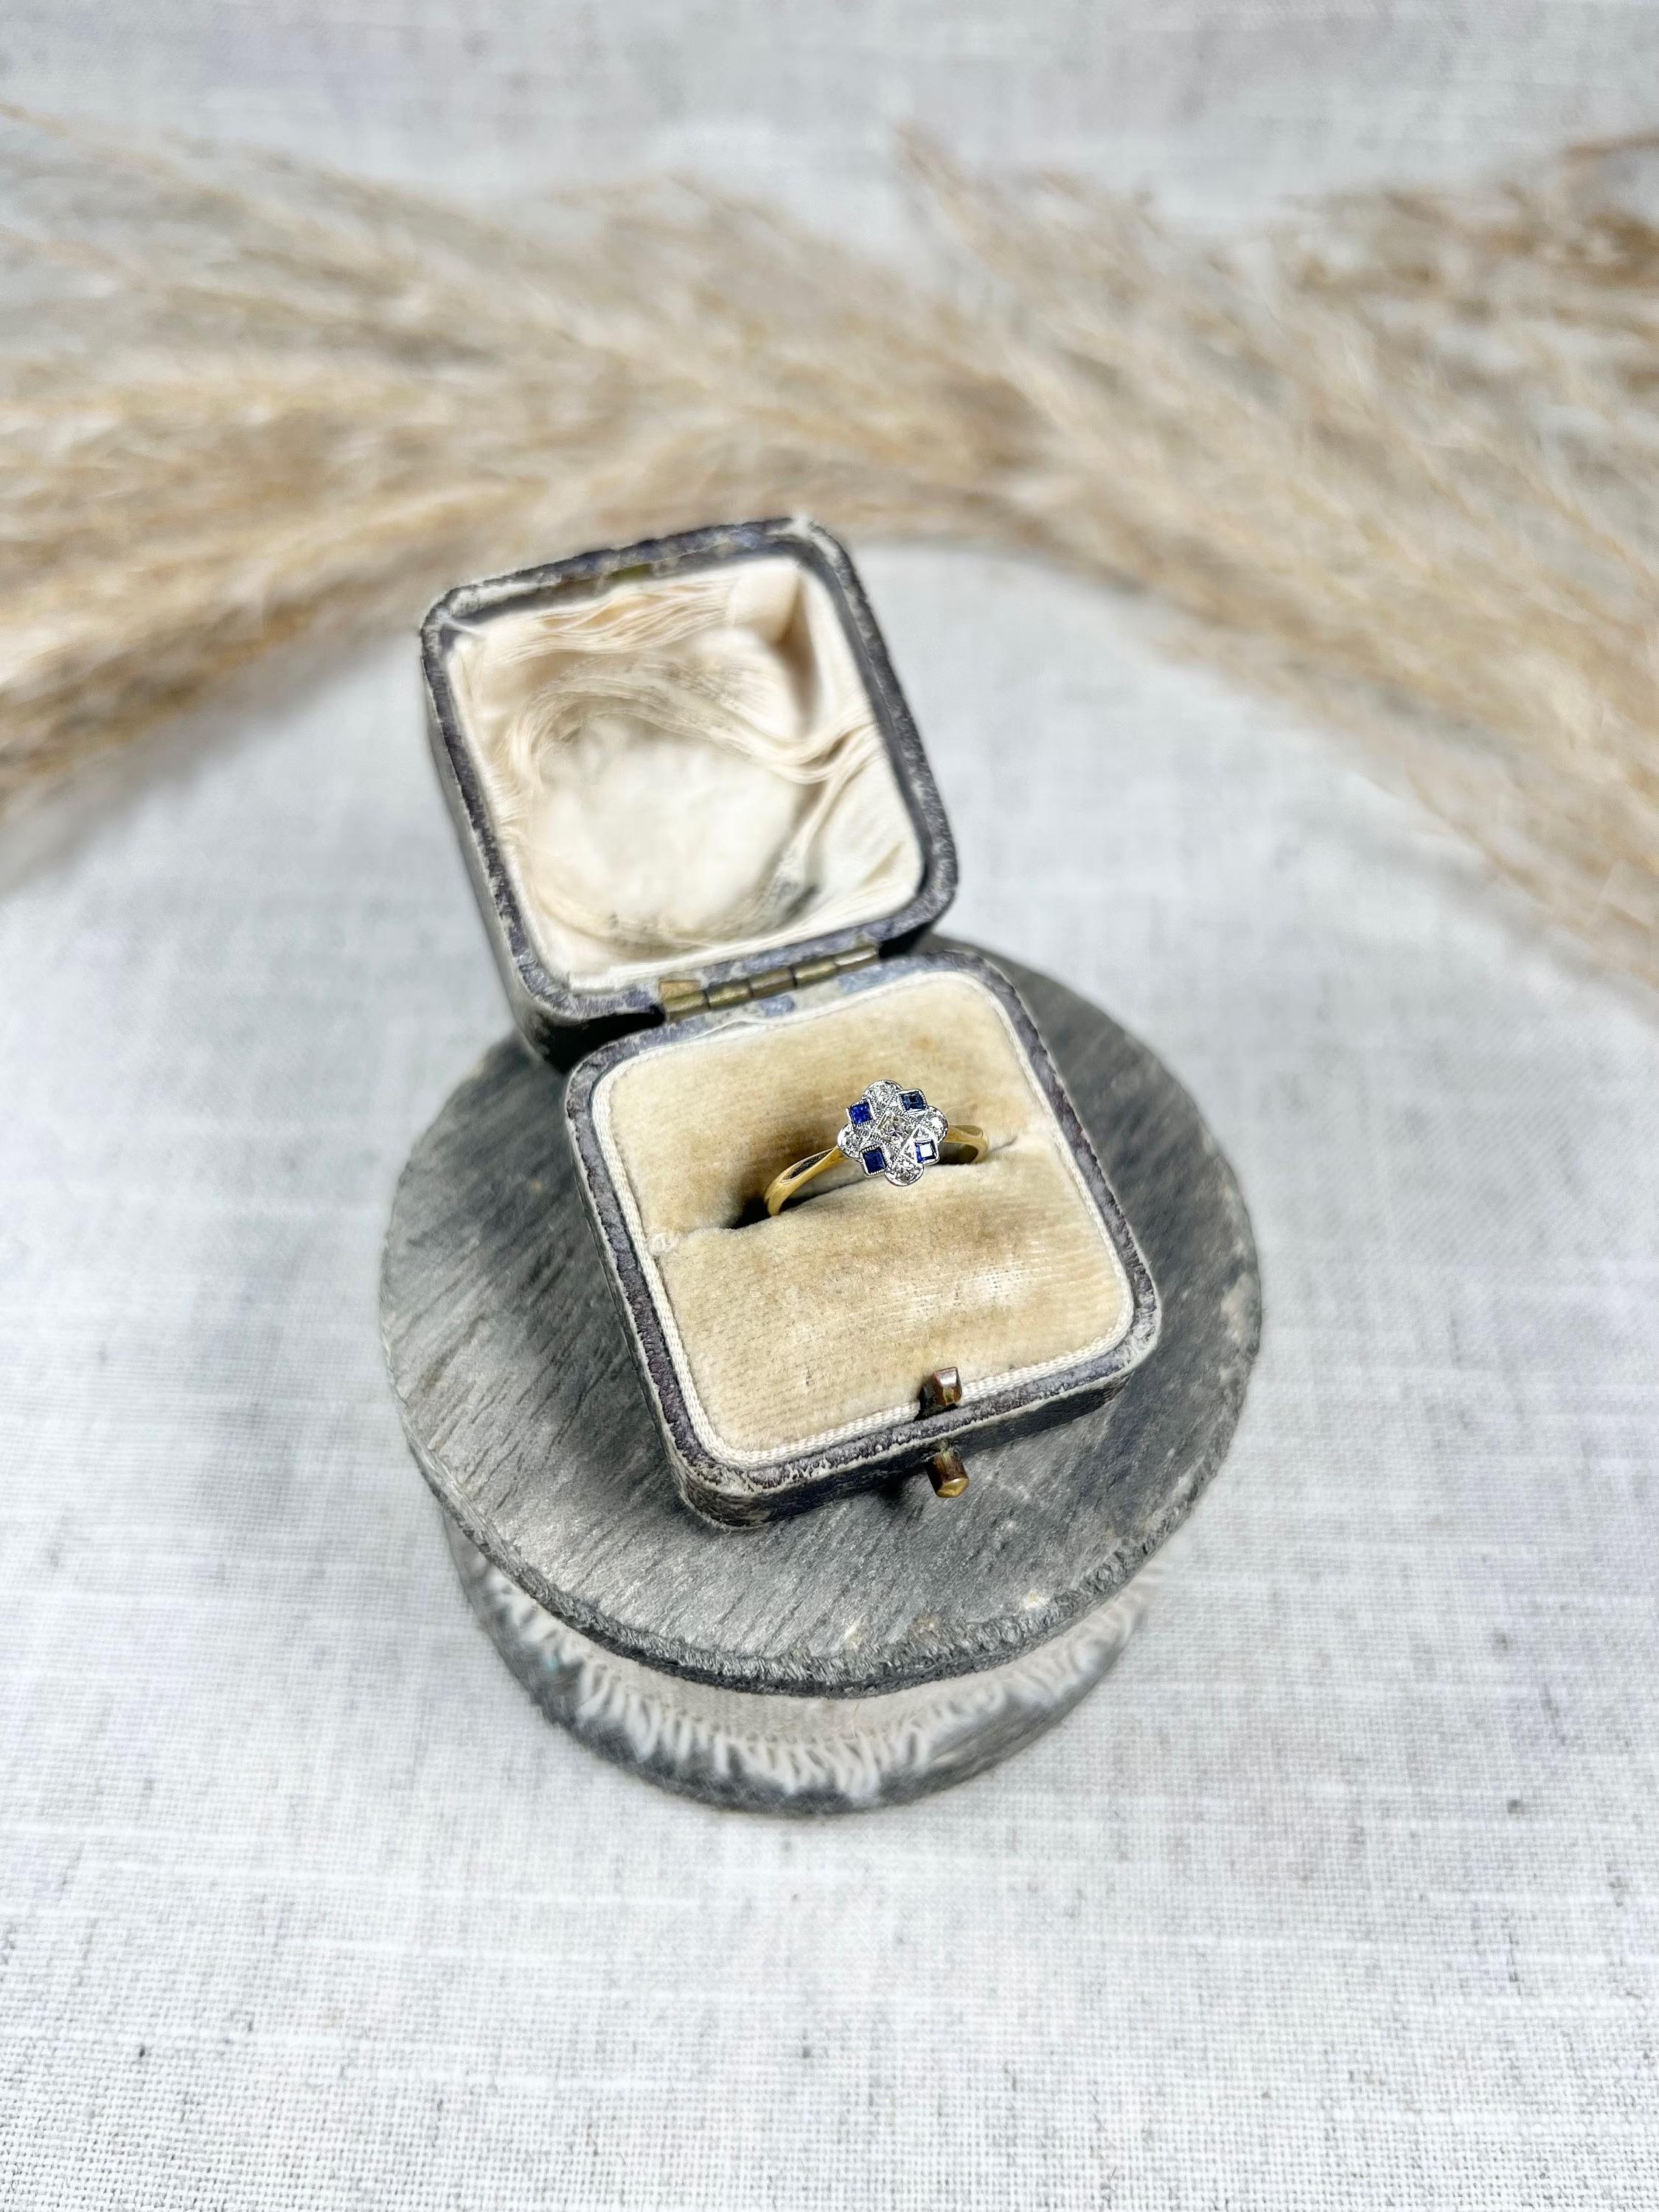 Sapphire Deco Ring 

18ct Gold & Platinum Stamped 

Circa 1910

This stunning Art Deco ring is truly one of a kind. Crafted from 18ct gold and platinum, the ring is stamped to guarantee its authenticity. The clover shape of the ring is adorned with